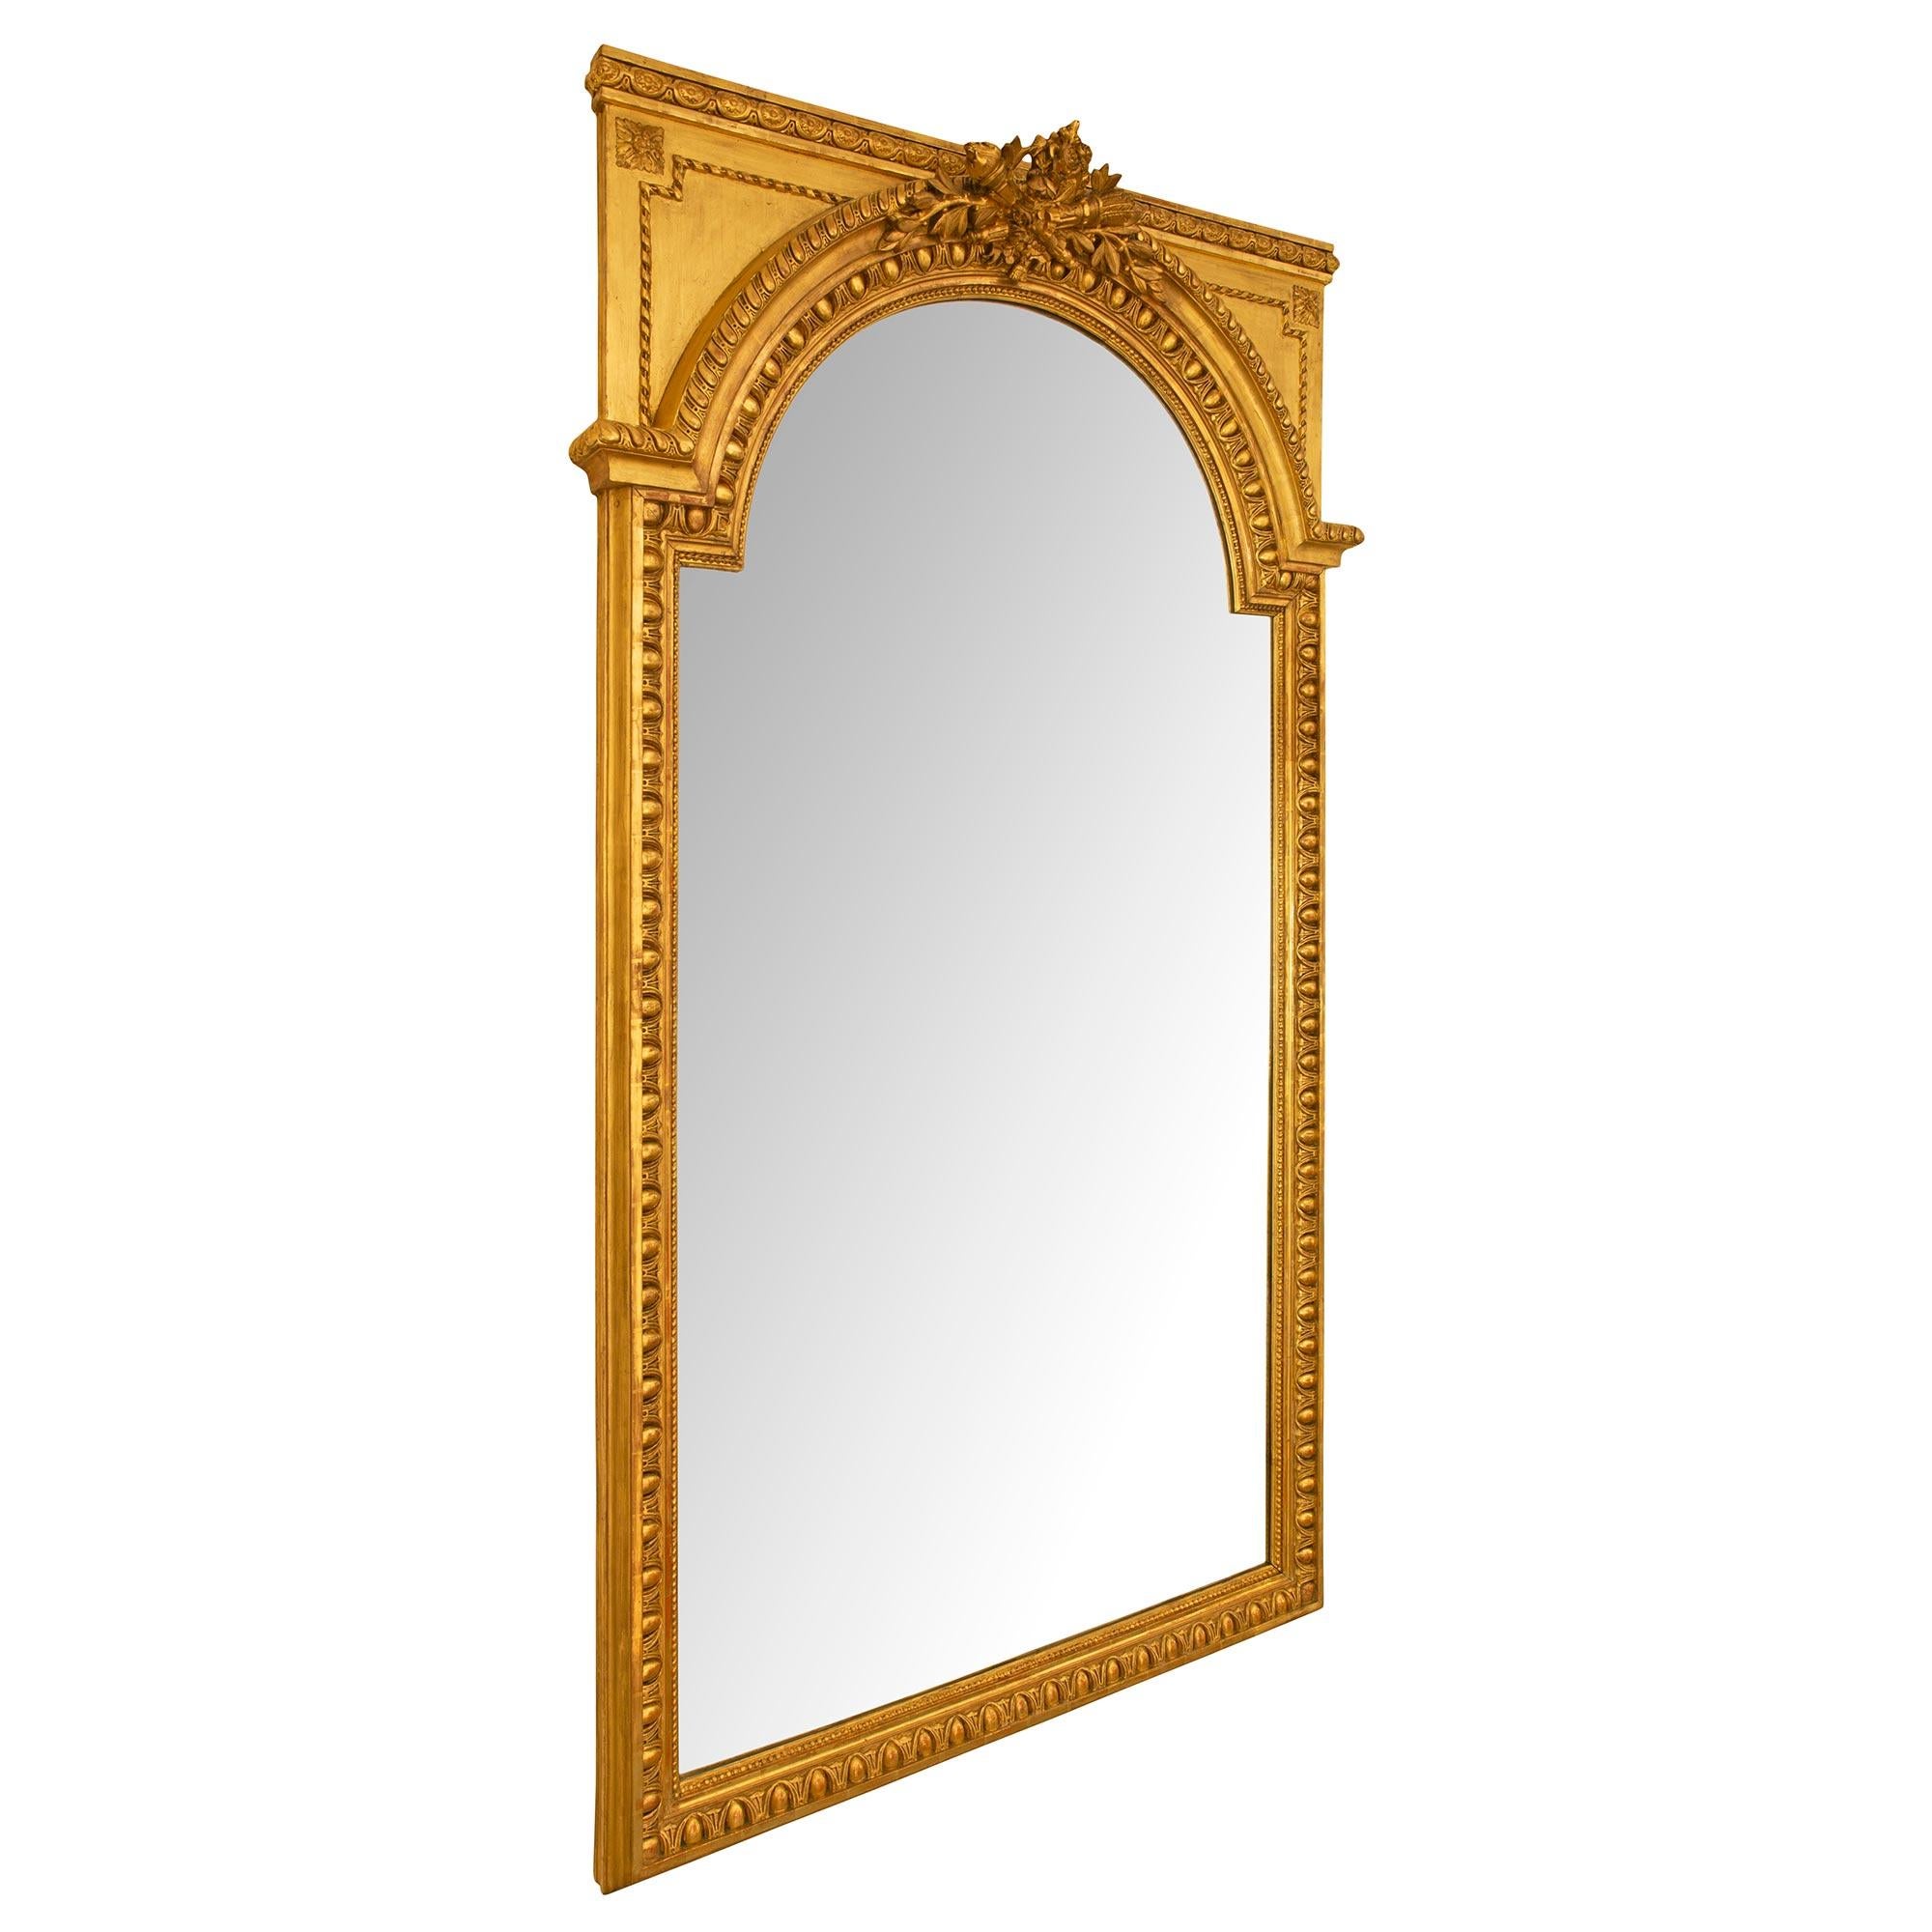 Pair of French Mid-19th Century Louis XVI Style Giltwood Mirrors In Good Condition For Sale In West Palm Beach, FL